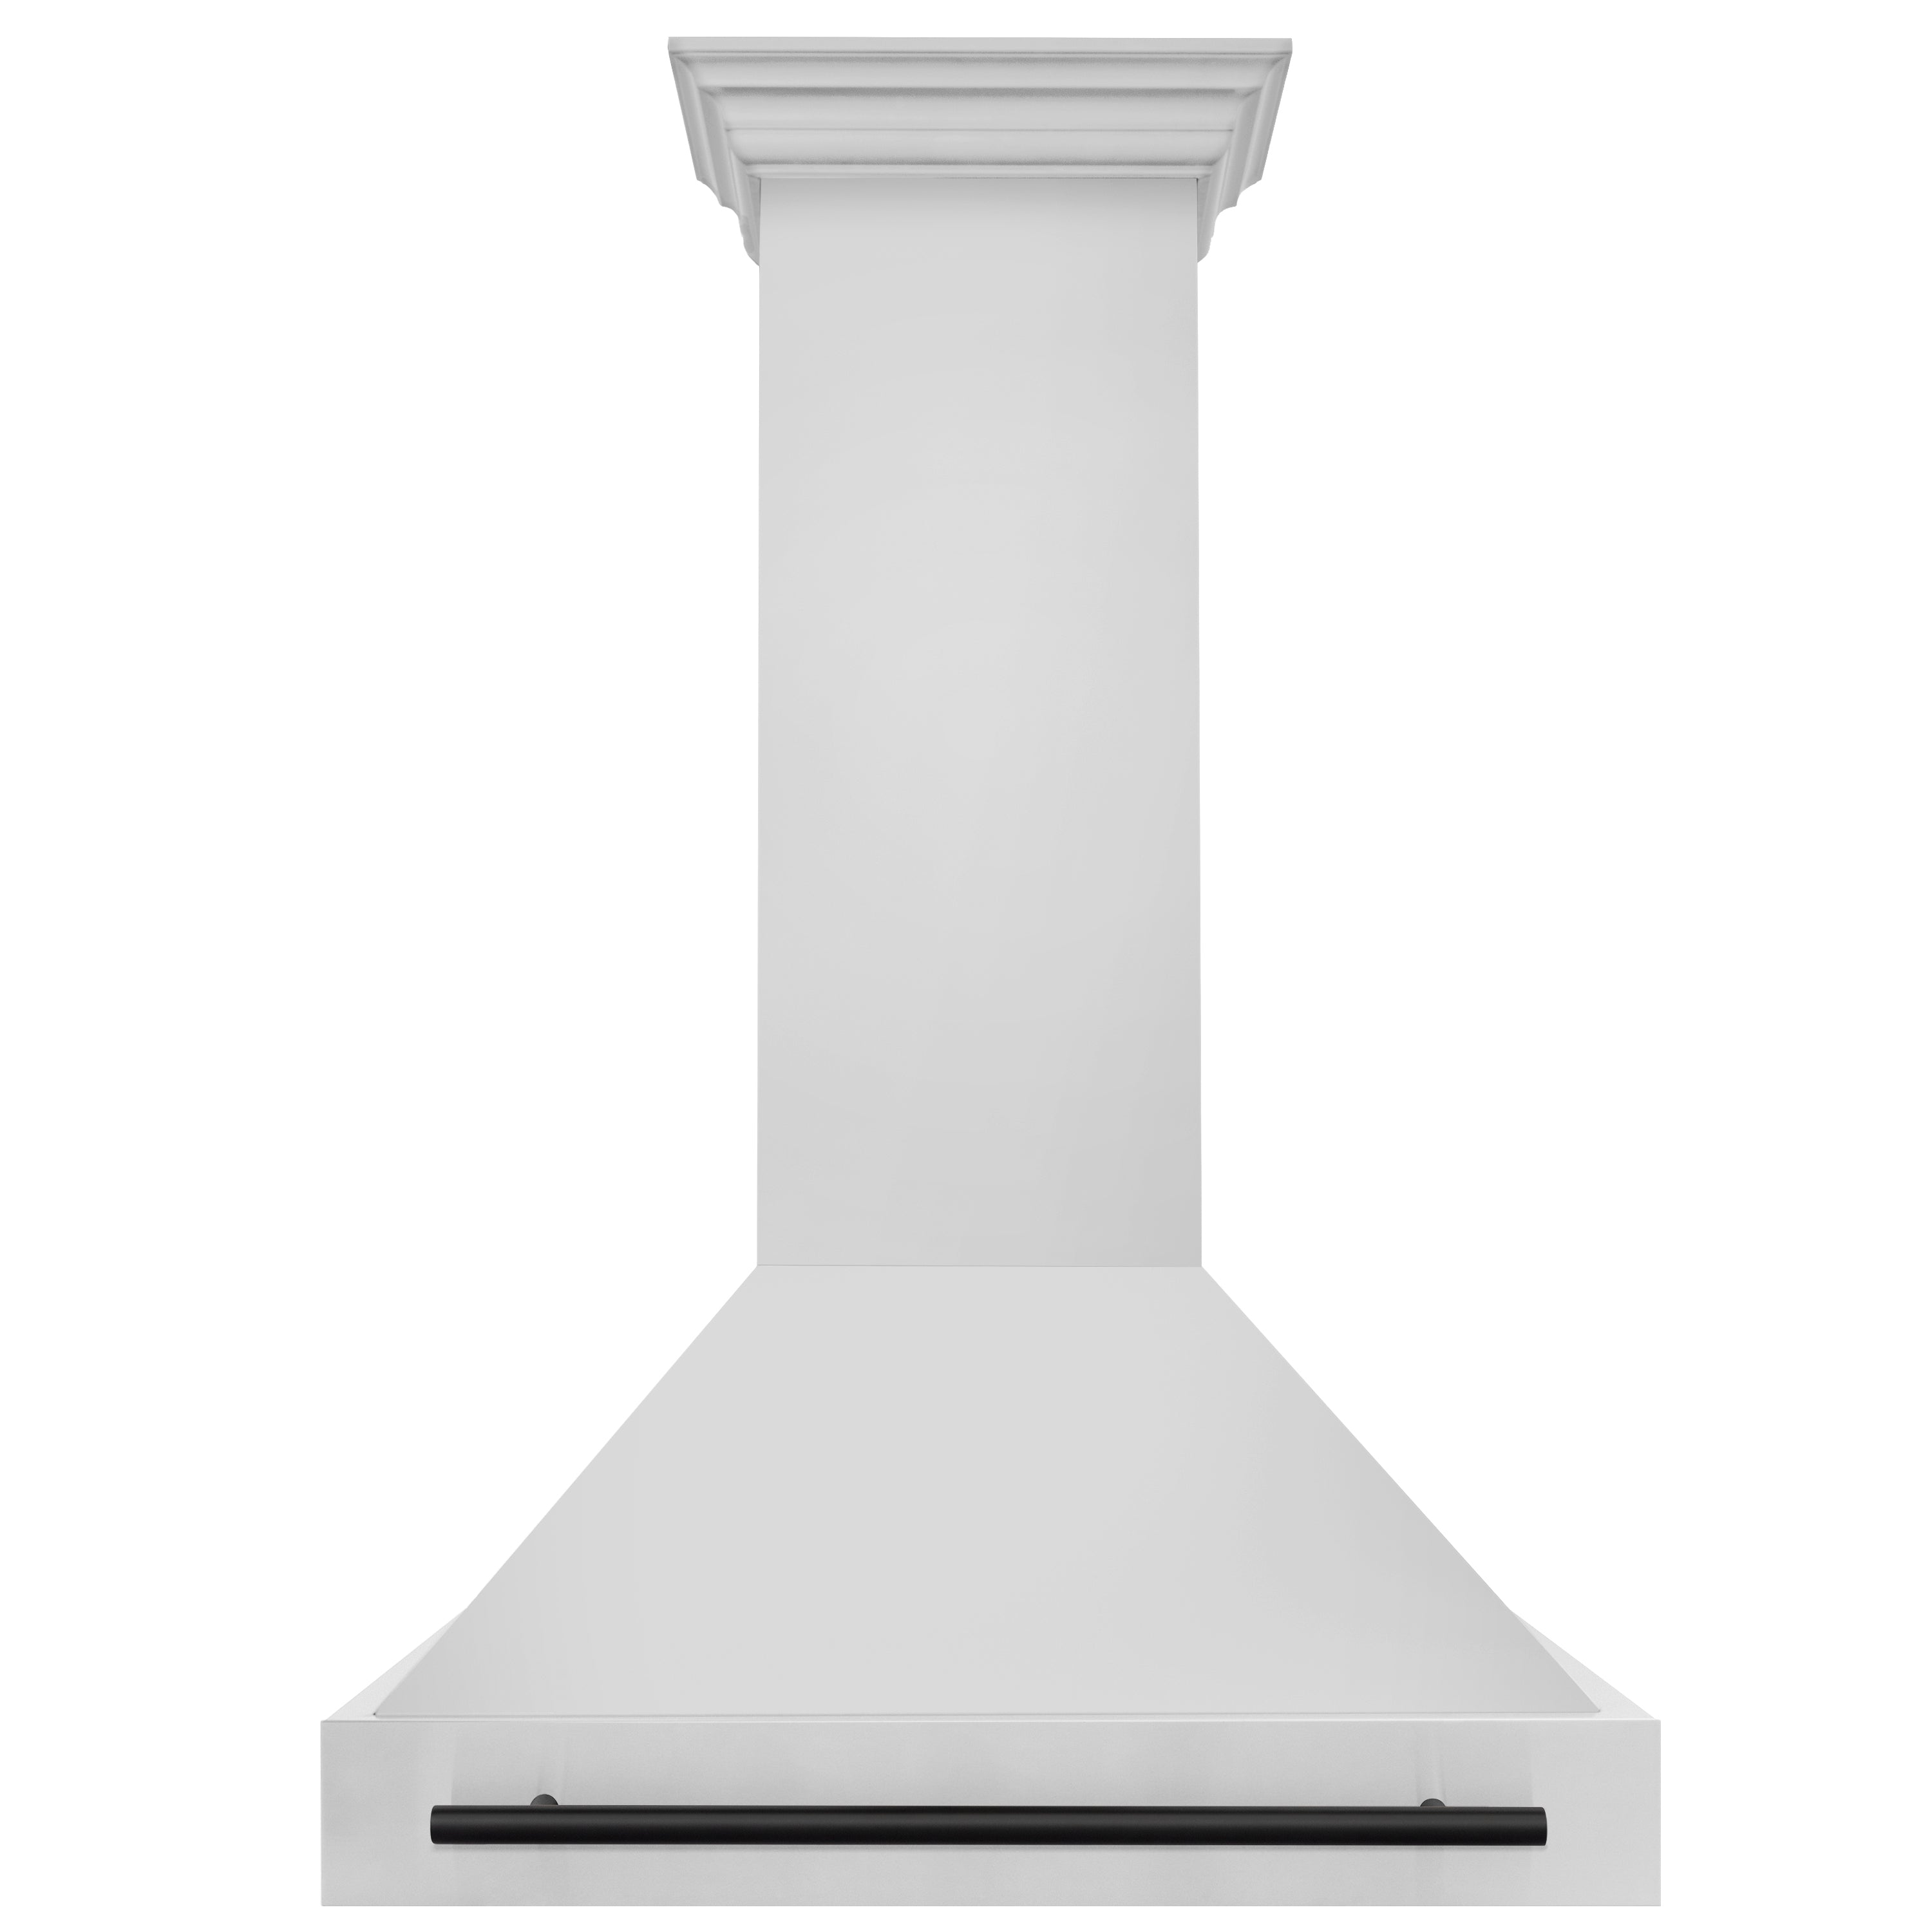 ZLINE 36" Autograph Edition Stainless Steel Range Hood with Stainless Steel Shell and Matte Black Handle (8654STZ-36-MB)